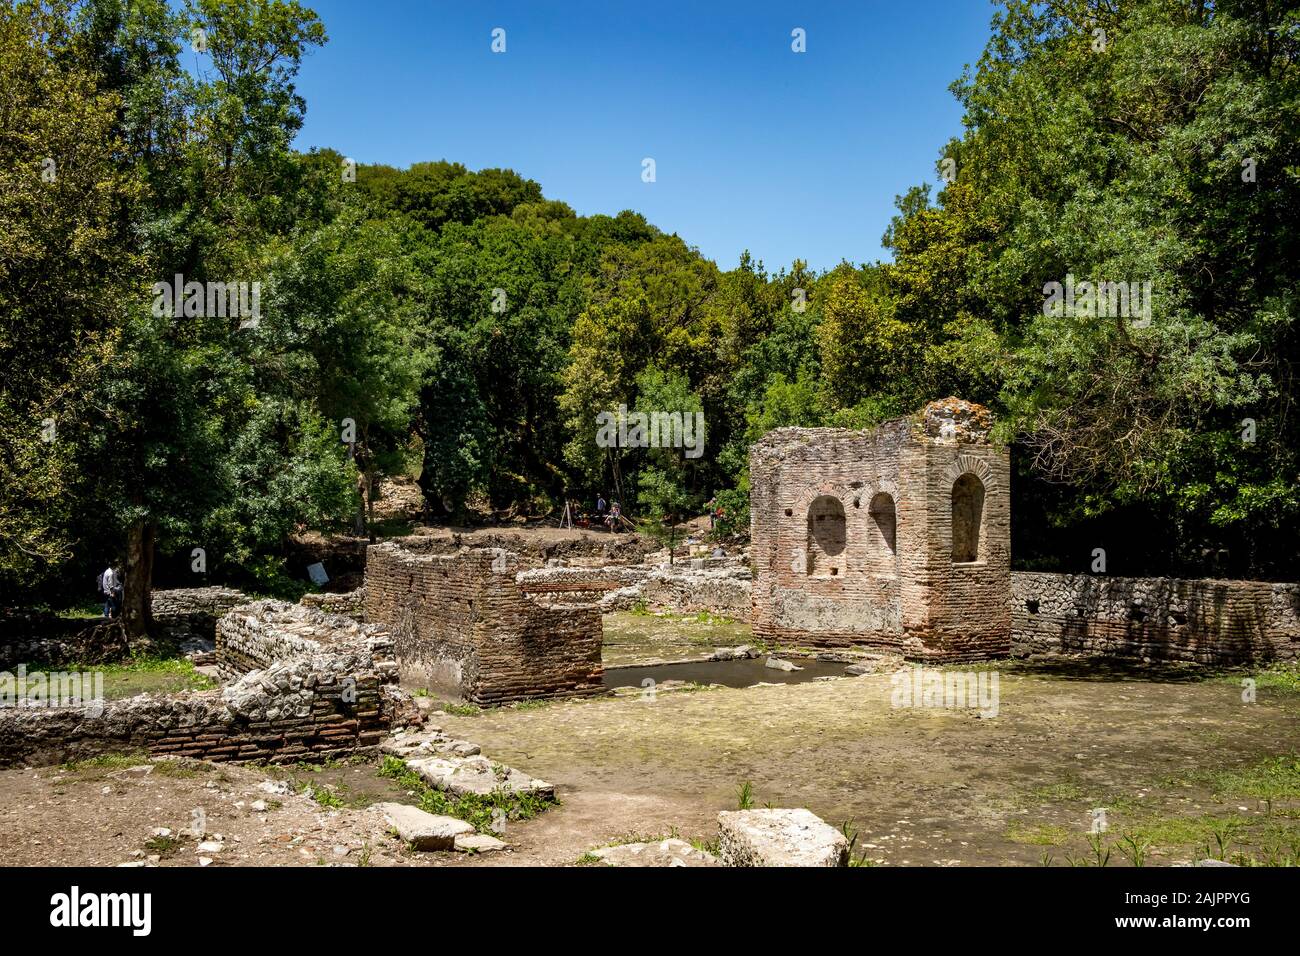 BUTRINT, ALBANIA - JUNE 7, 2019: Excavation works in progress. Beautiful warm spring day and archeological ruins at Albanian UNESCO heritage. Travel photography with fresh green flora Stock Photo